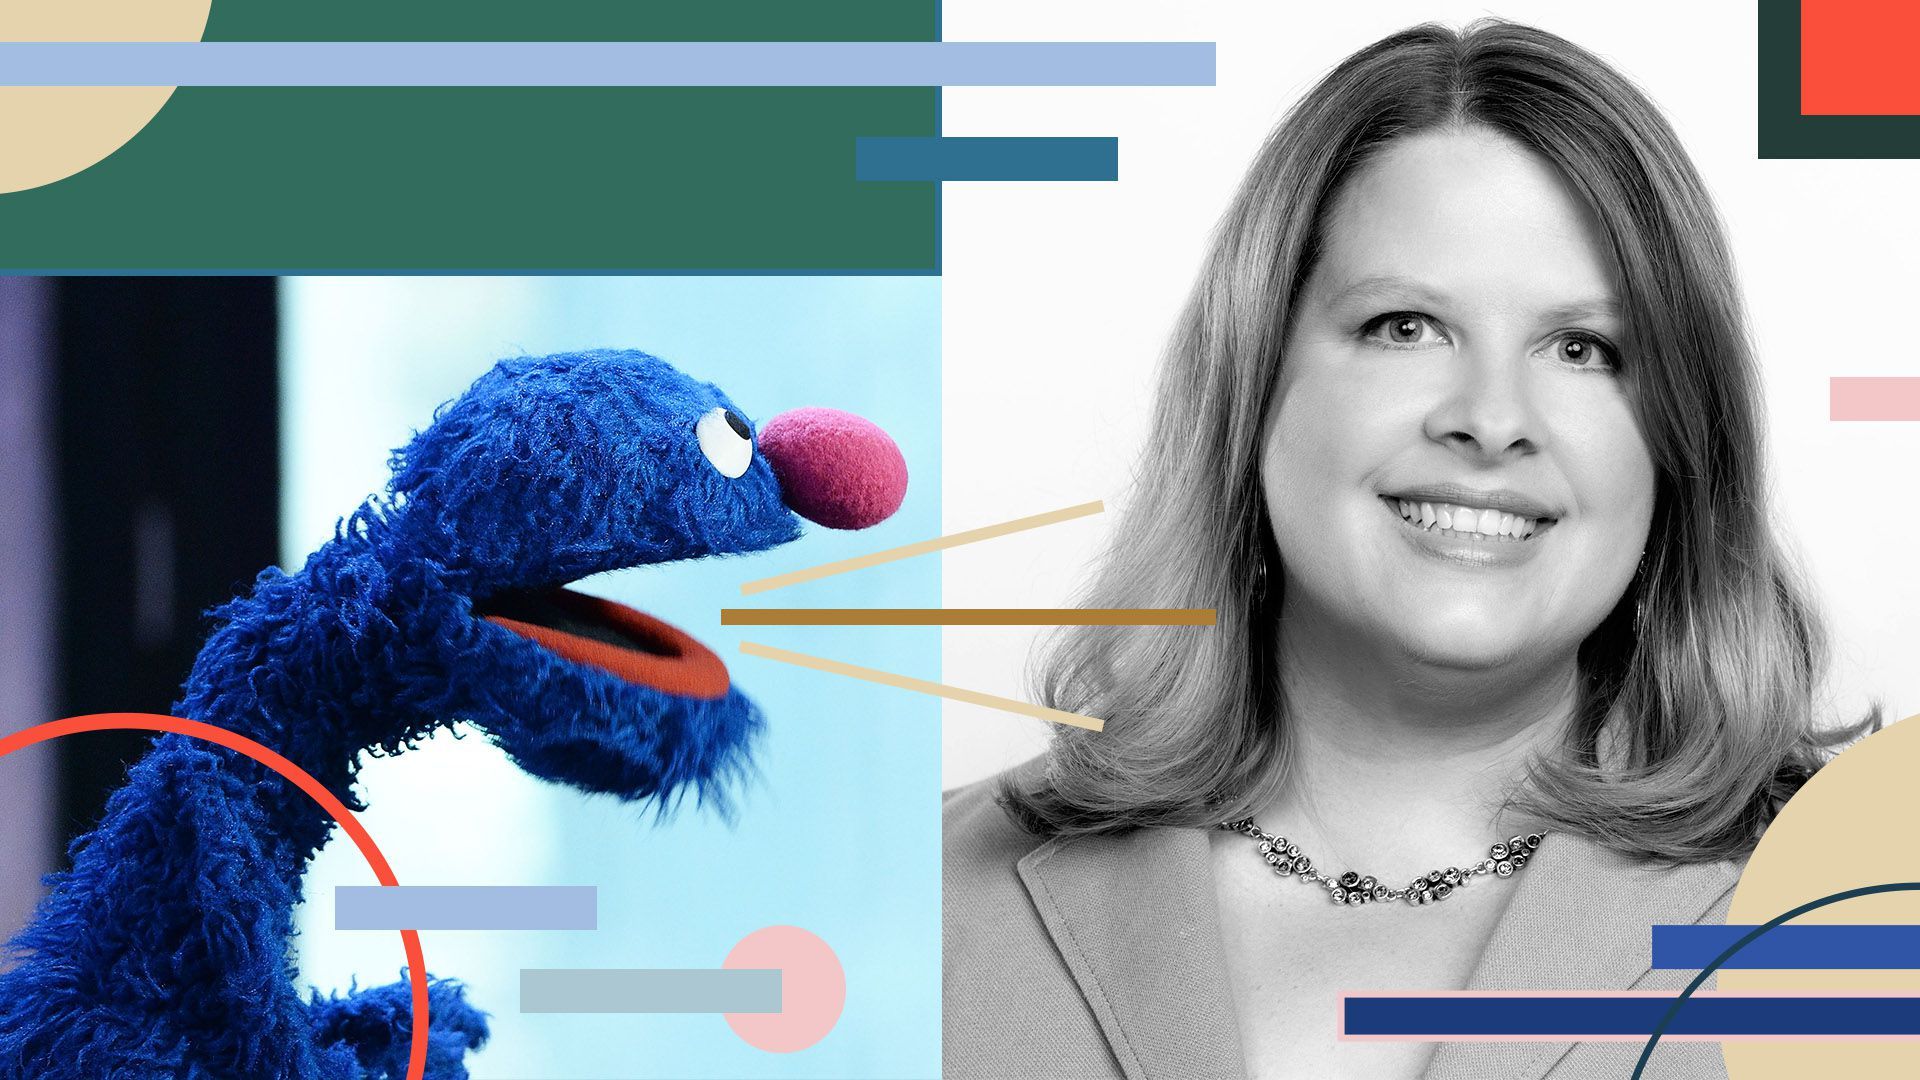 Photo Illustration of Alison Bryant and Grover.